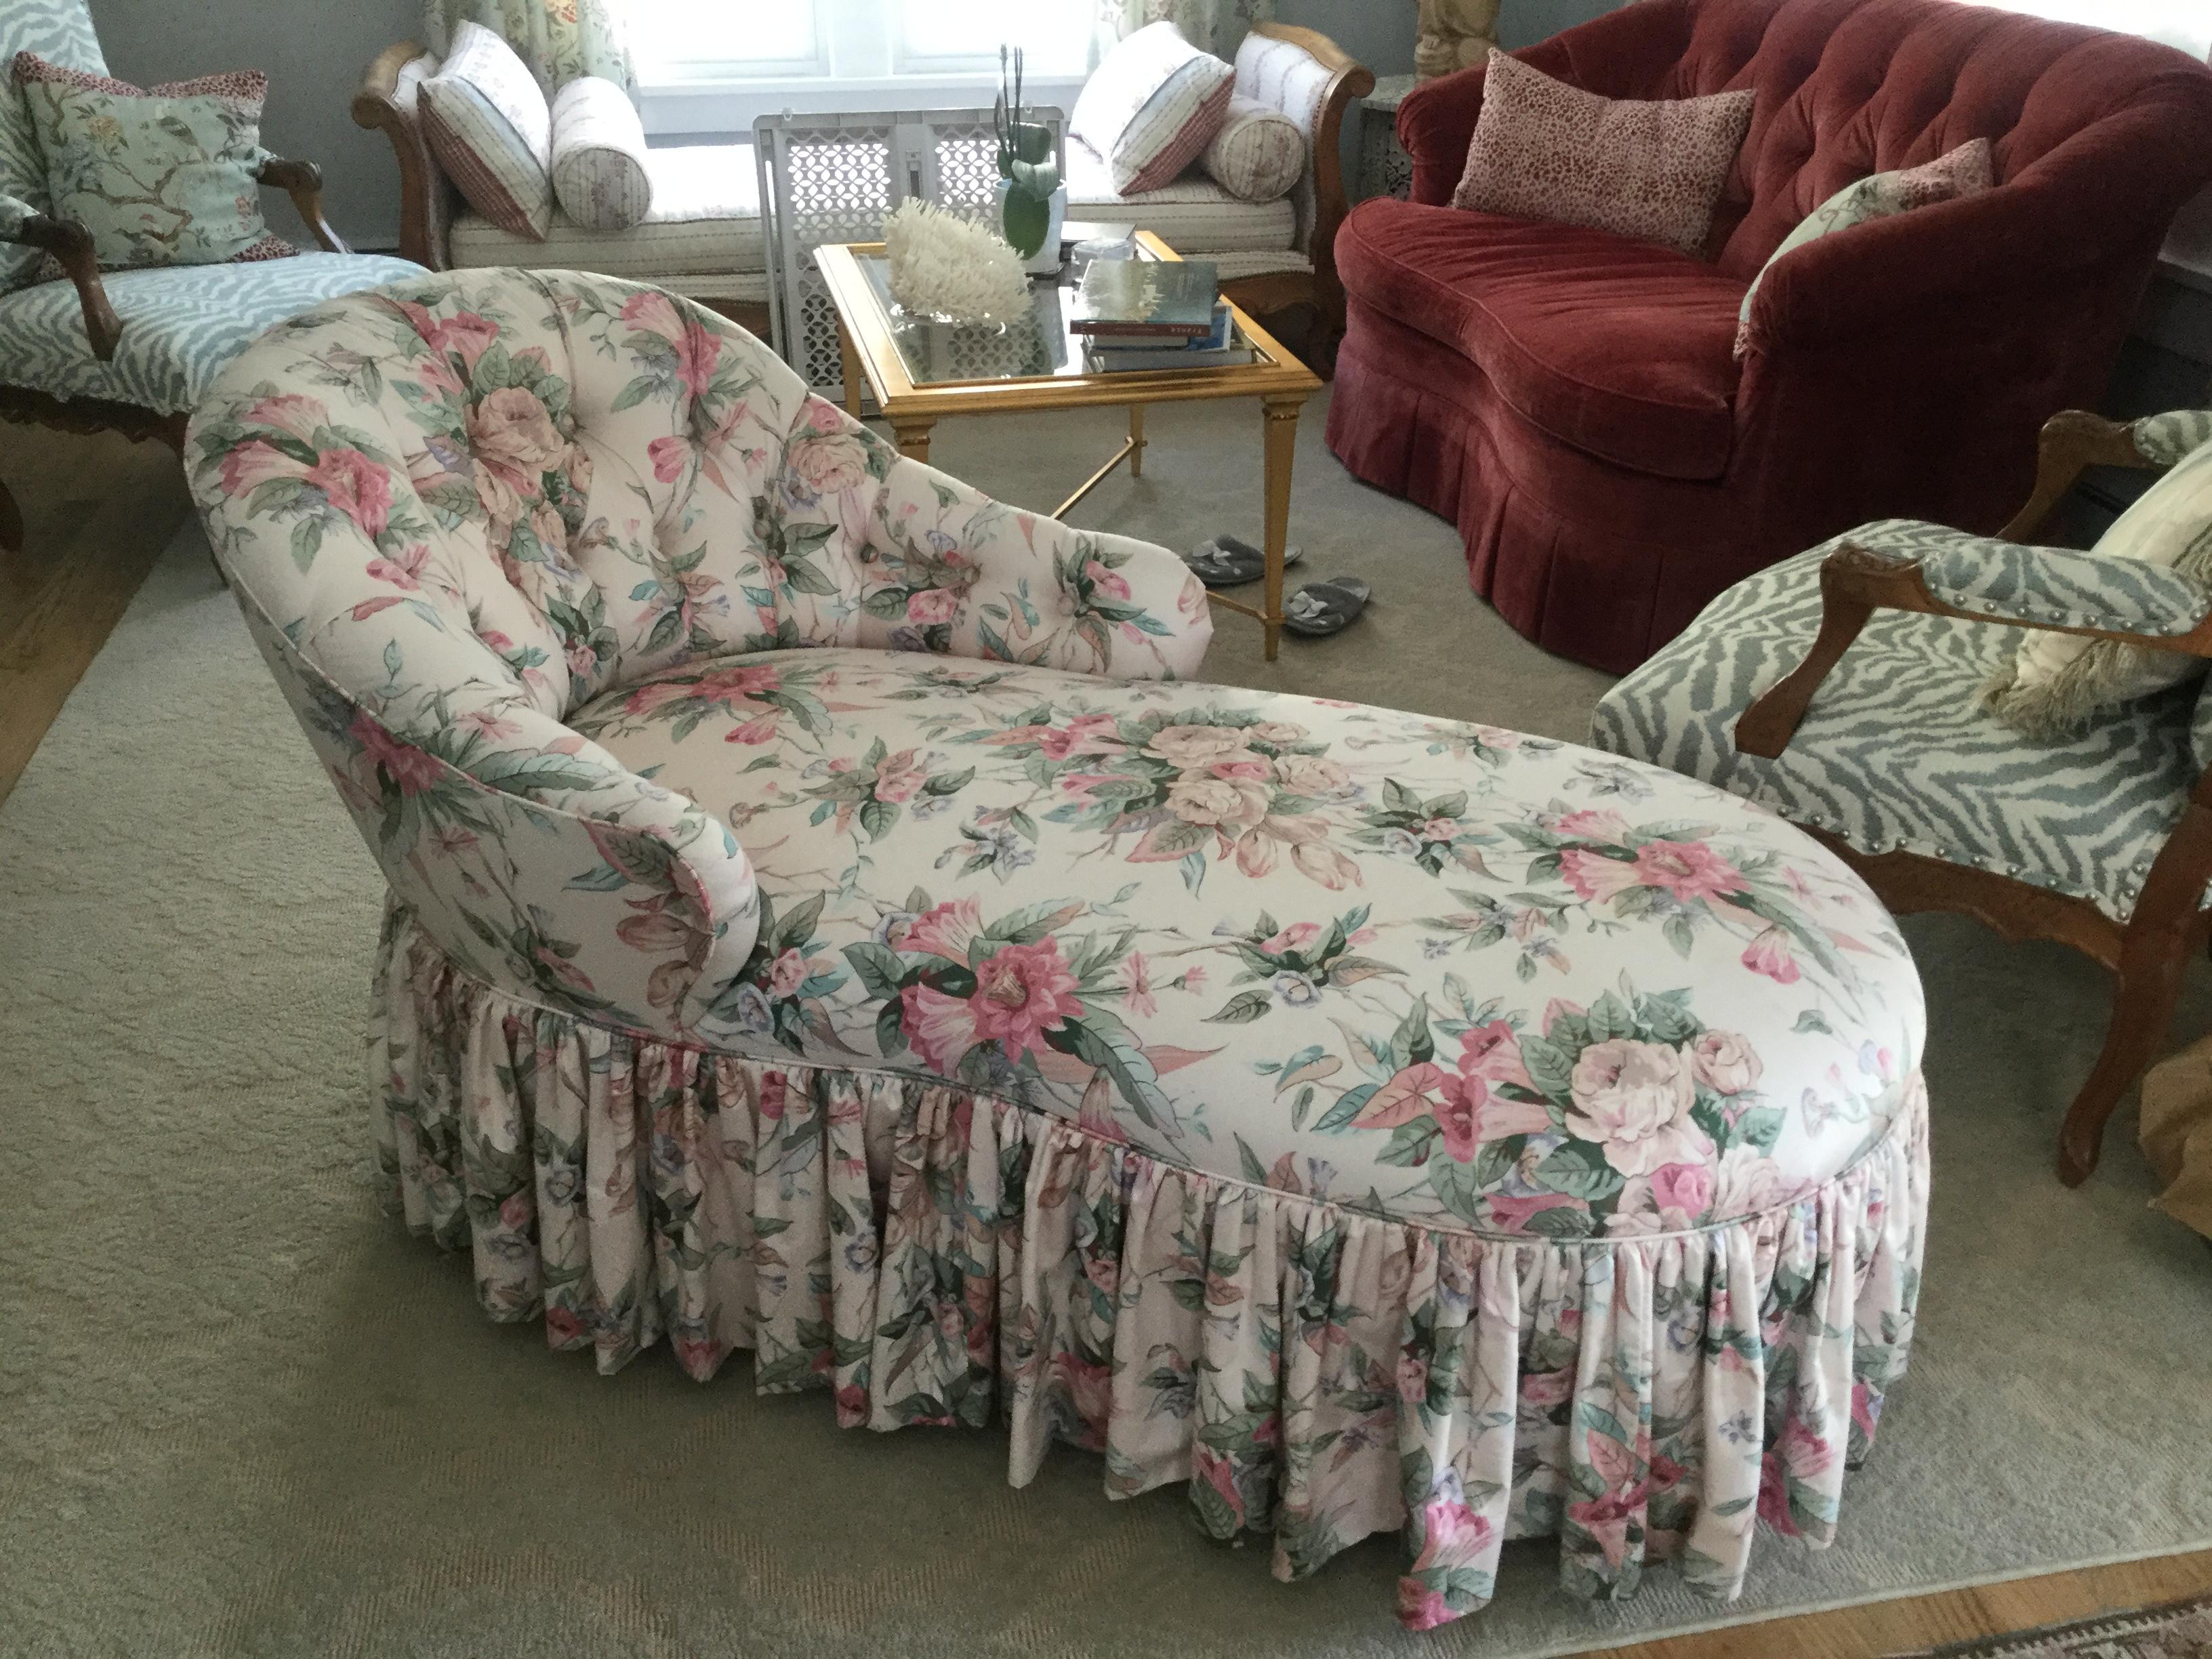 Romantic tufted-back chaise. This elegant chaise is upholstered in a tradition English cotton chintz featuring a soft floral pattern in many shades of pink and green on a white background. The back is tufted with covered buttons, and a full, shirred